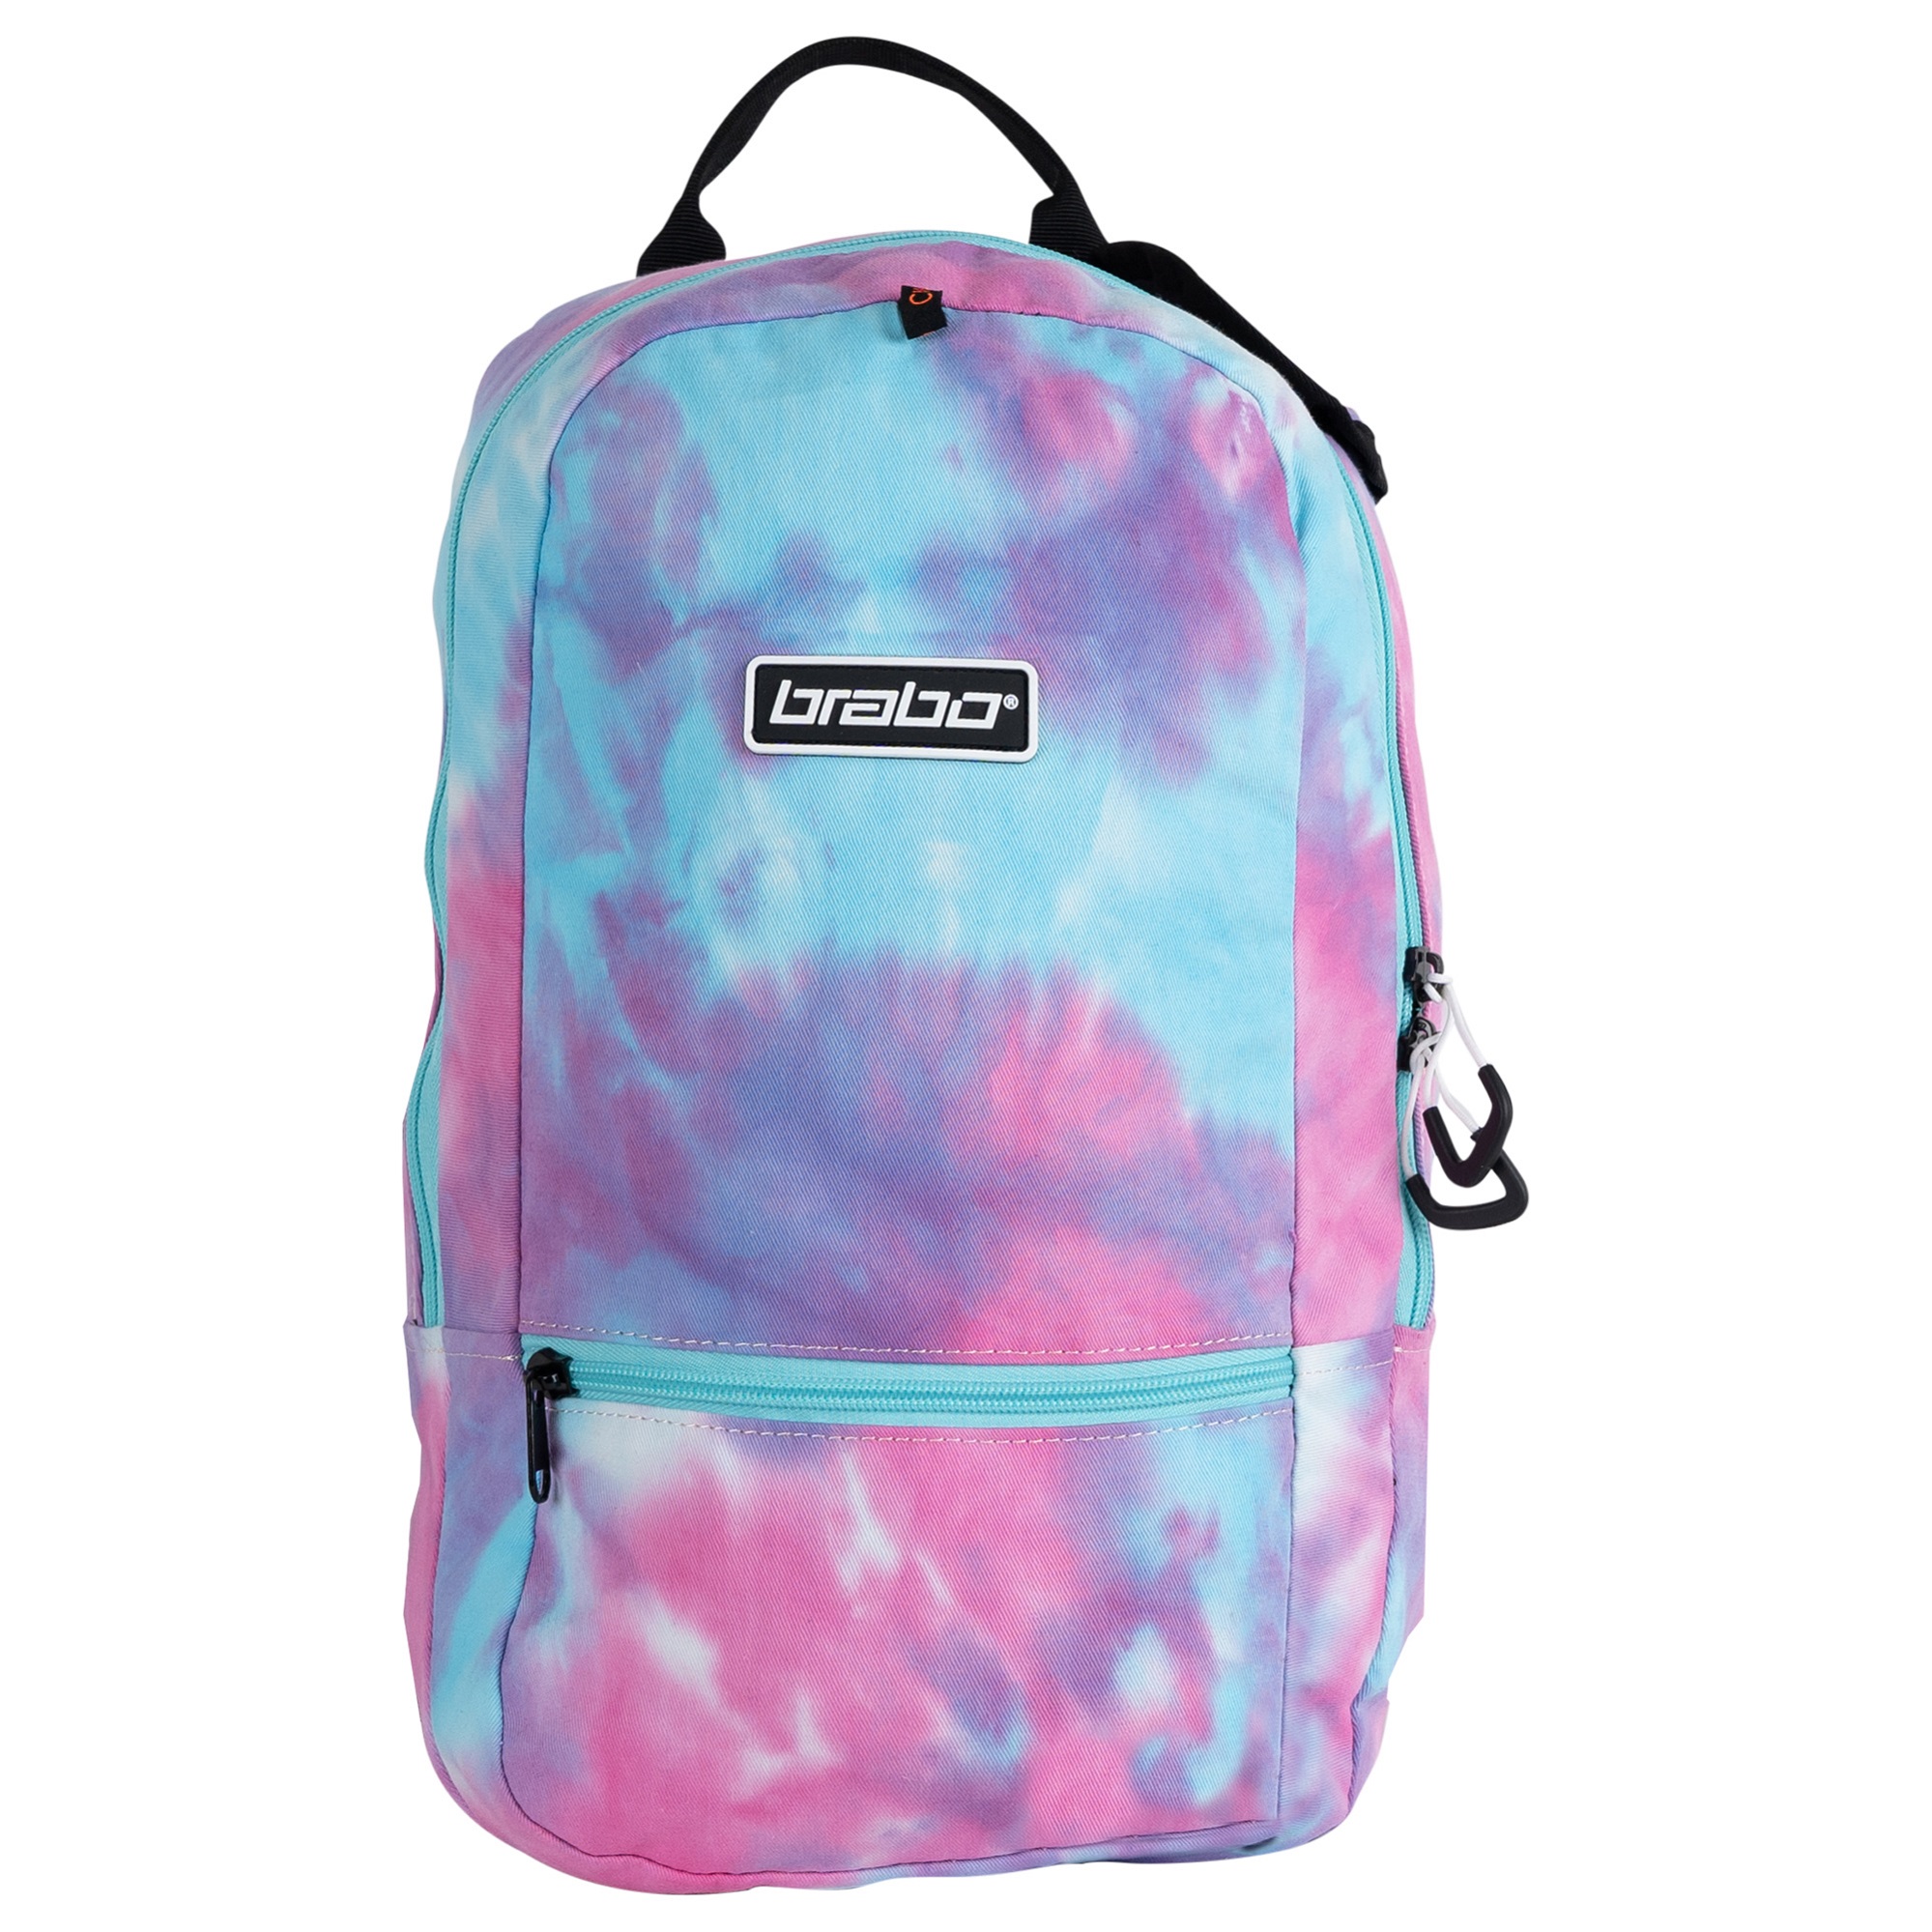 Backpack Fun Sparkle